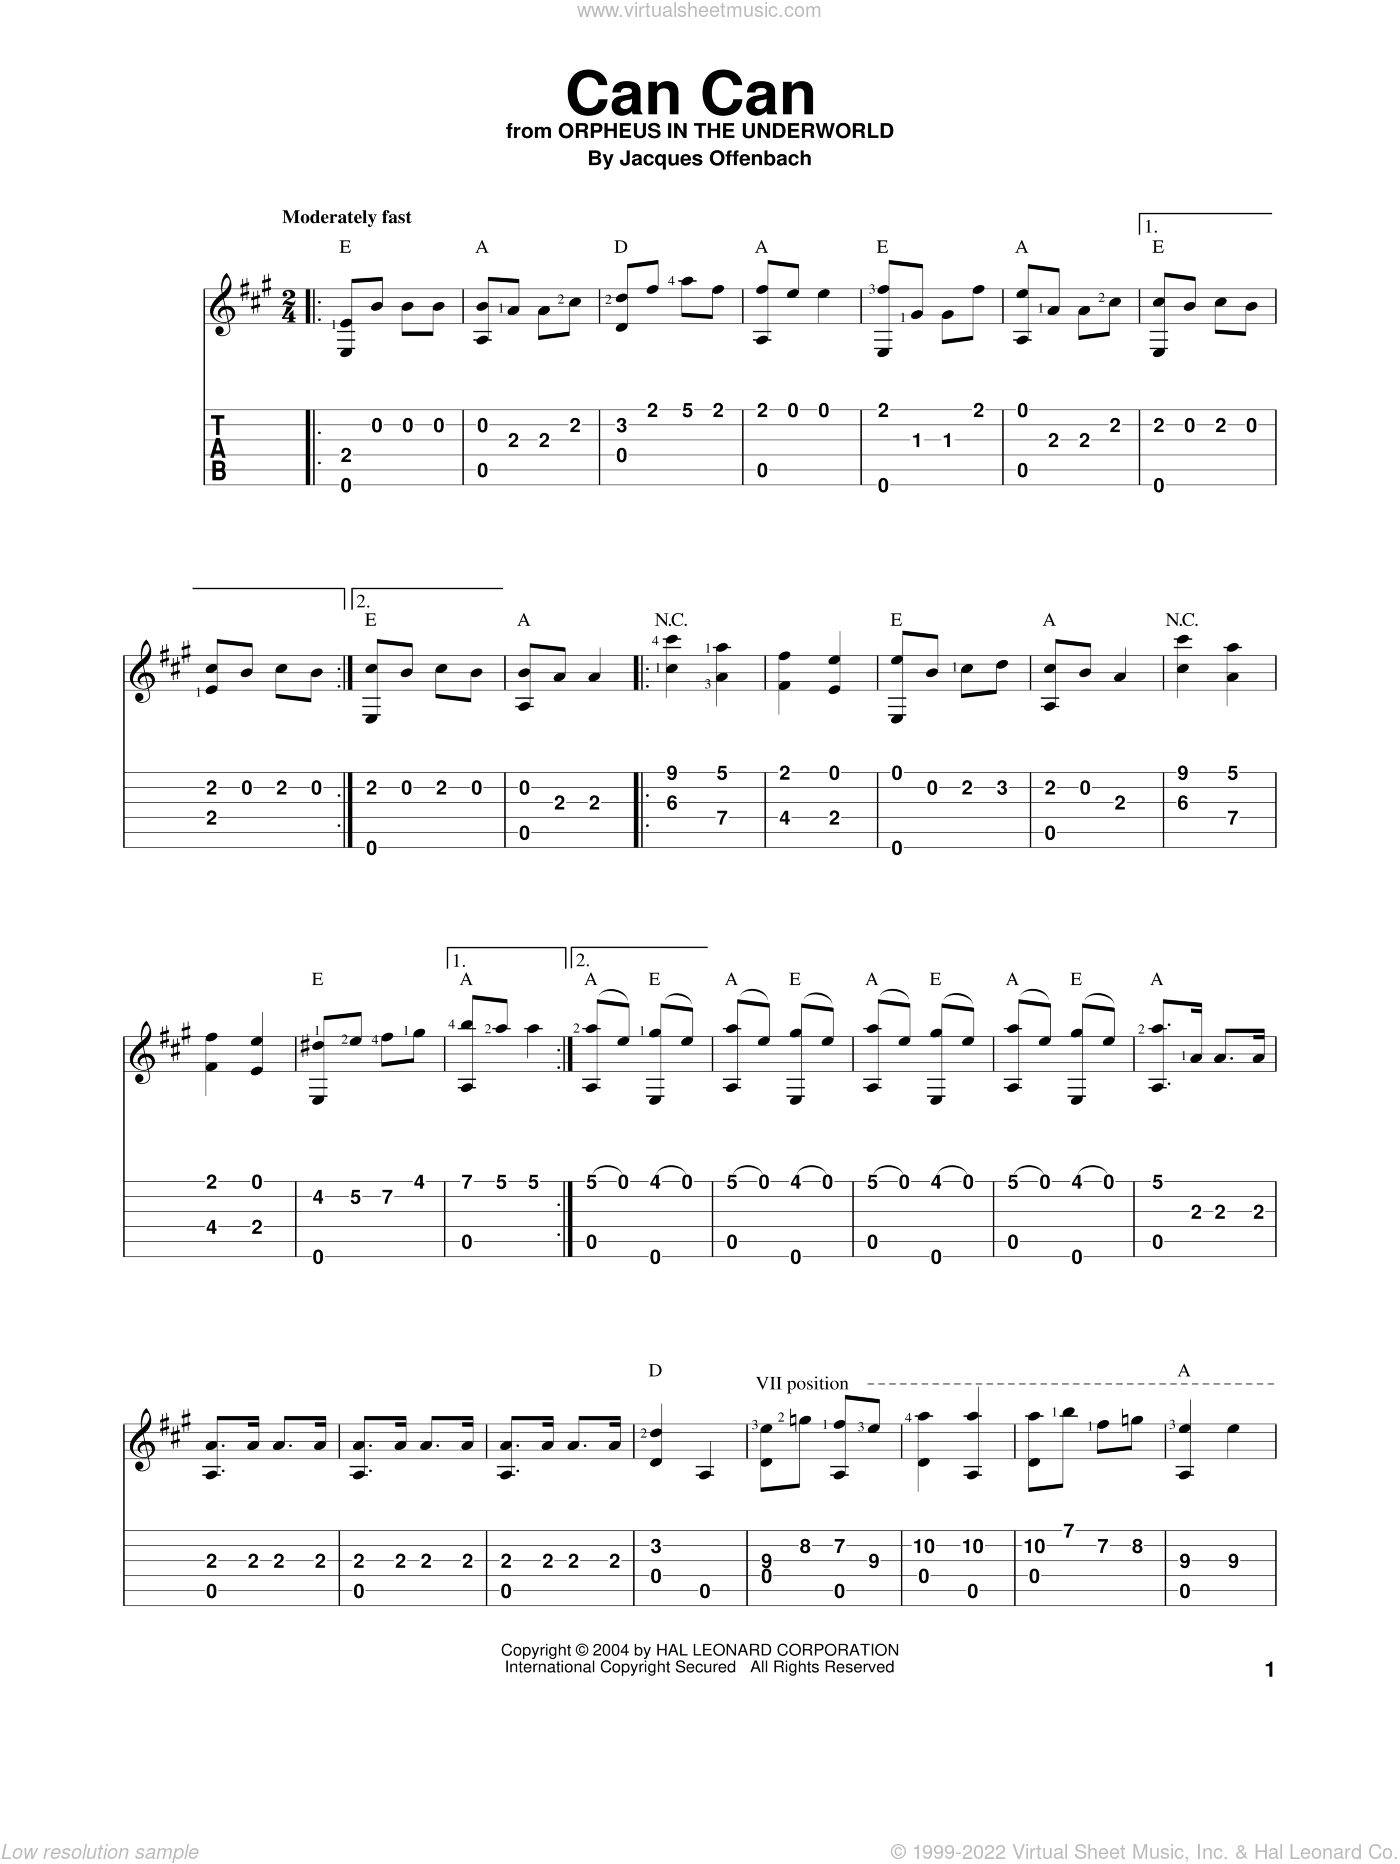 Offenbach - Can Can sheet music (intermediate) for guitar solo